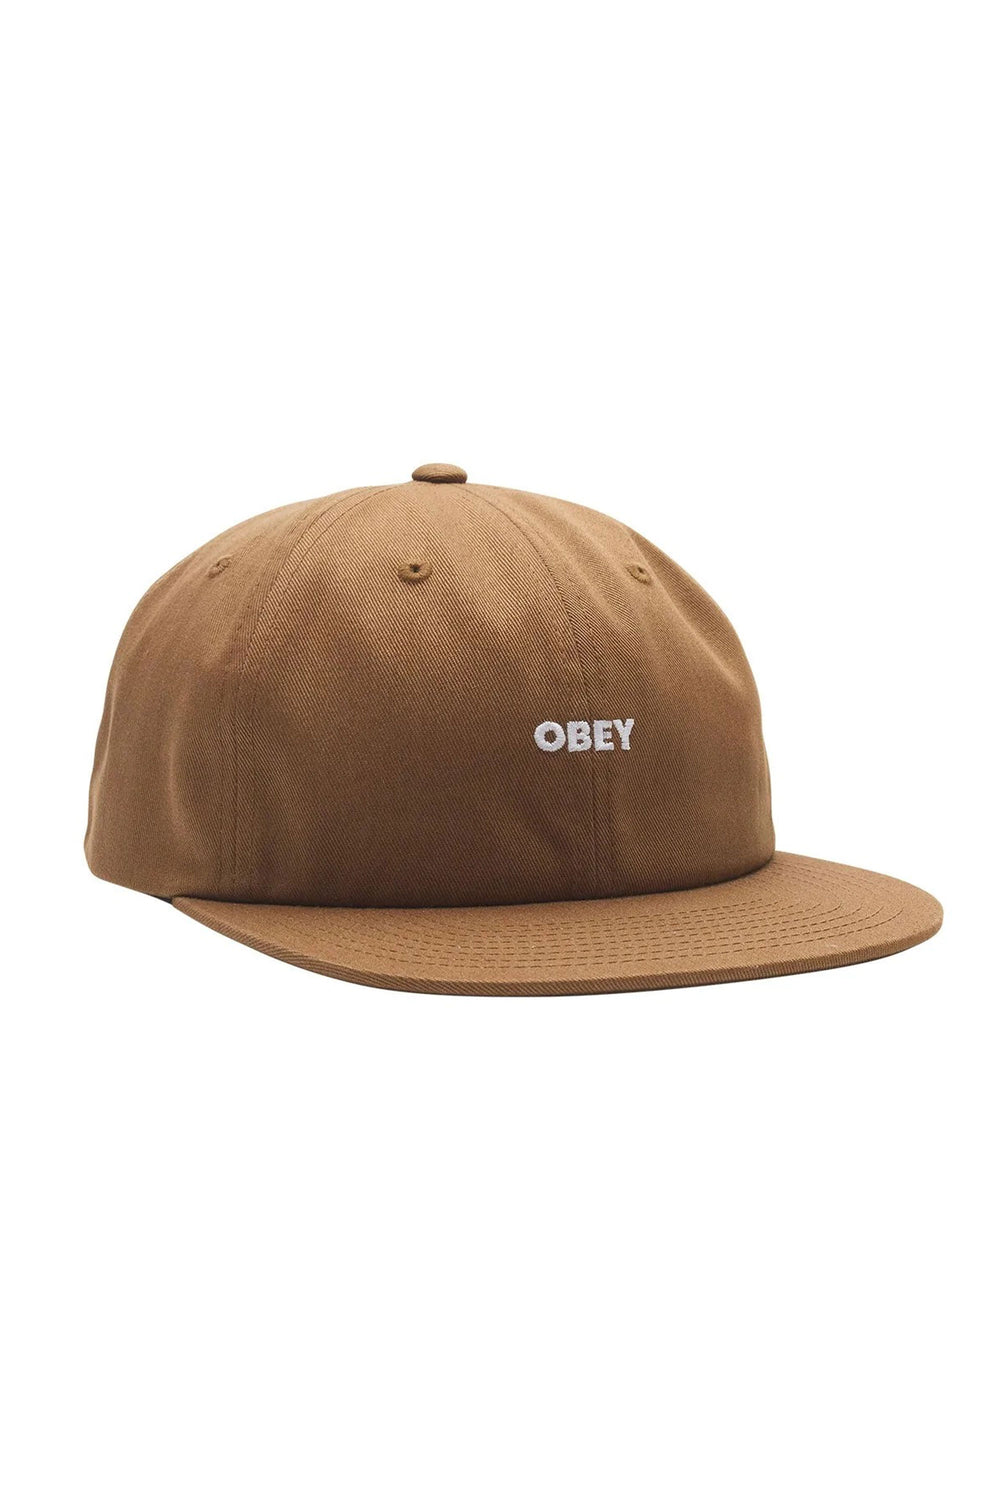    Pukas-Surf-Shop-obey-hat-Bold-Twill-6